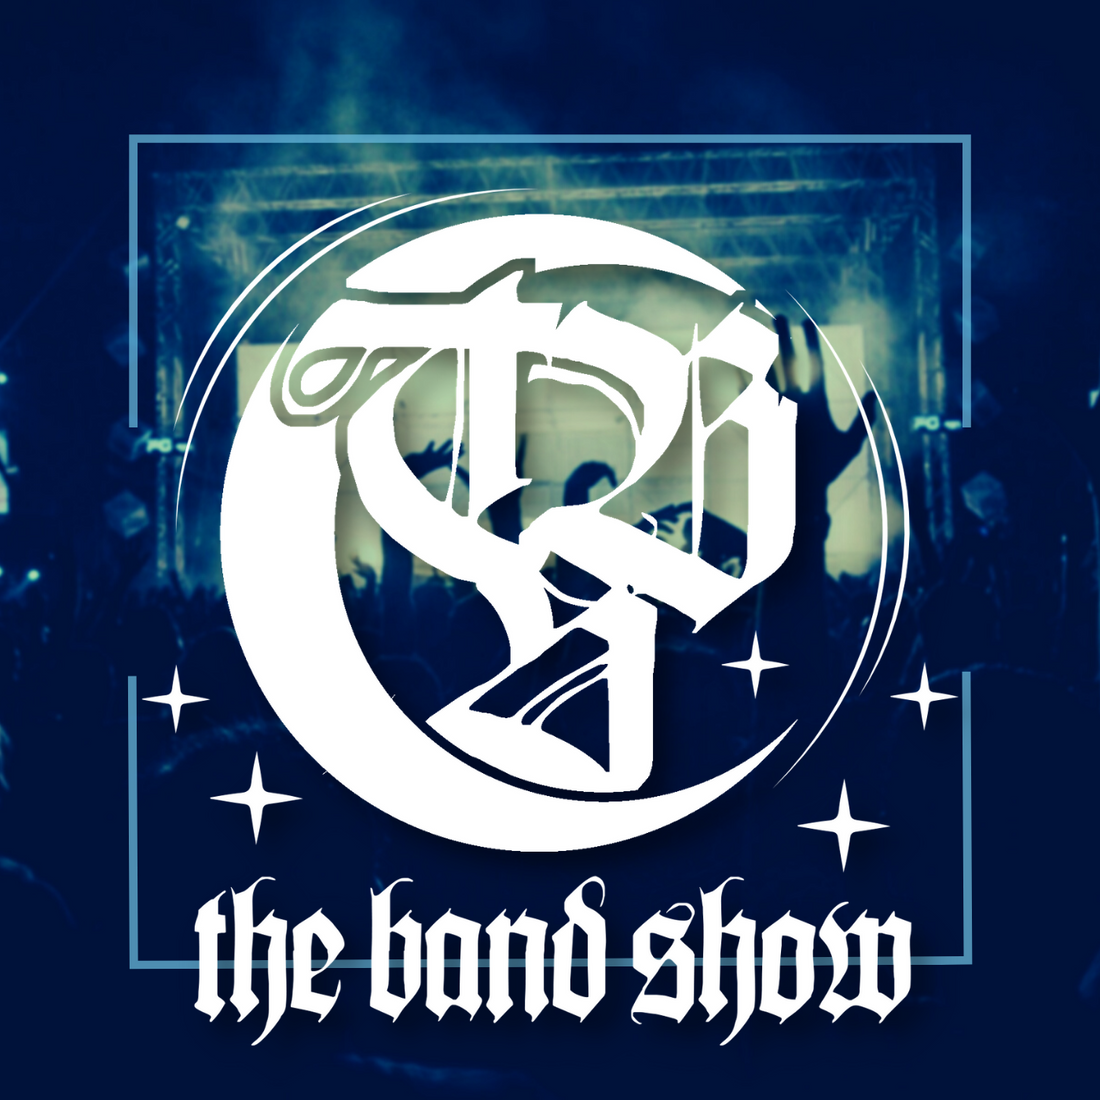 Interview - The Band Show